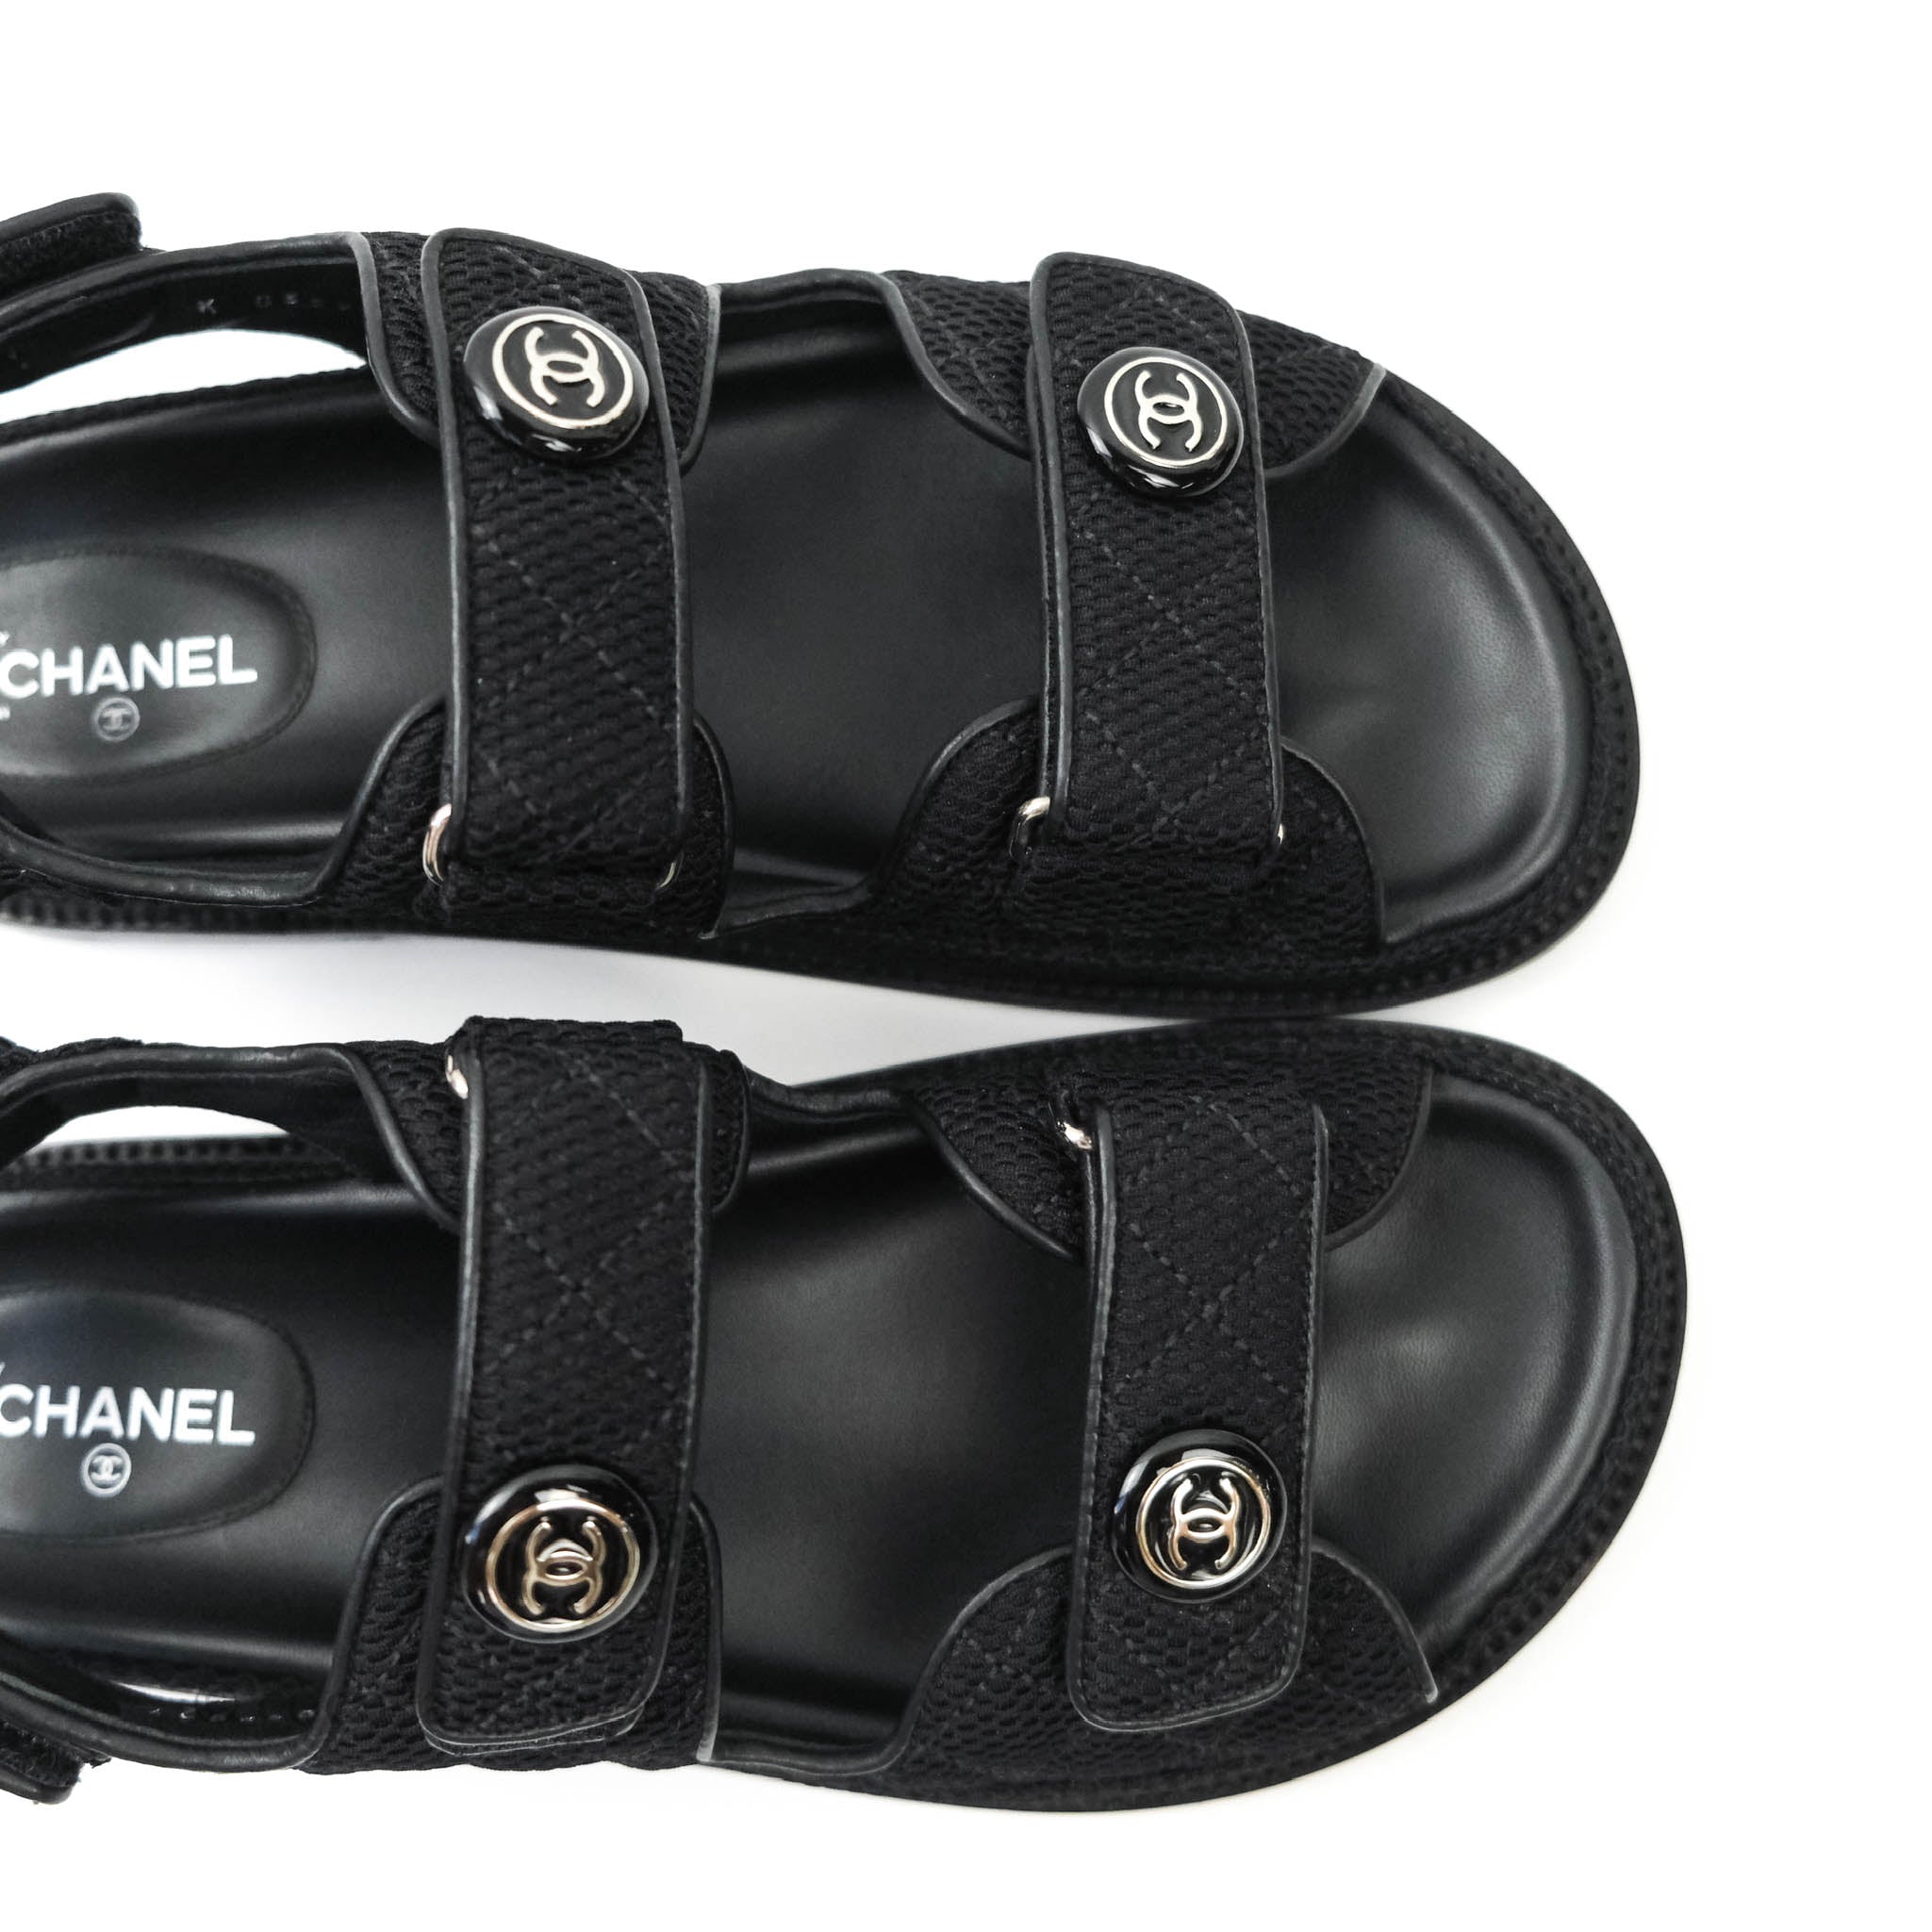 Chanel Black Leather Quilted Rope CC Flat Sandals Size 38